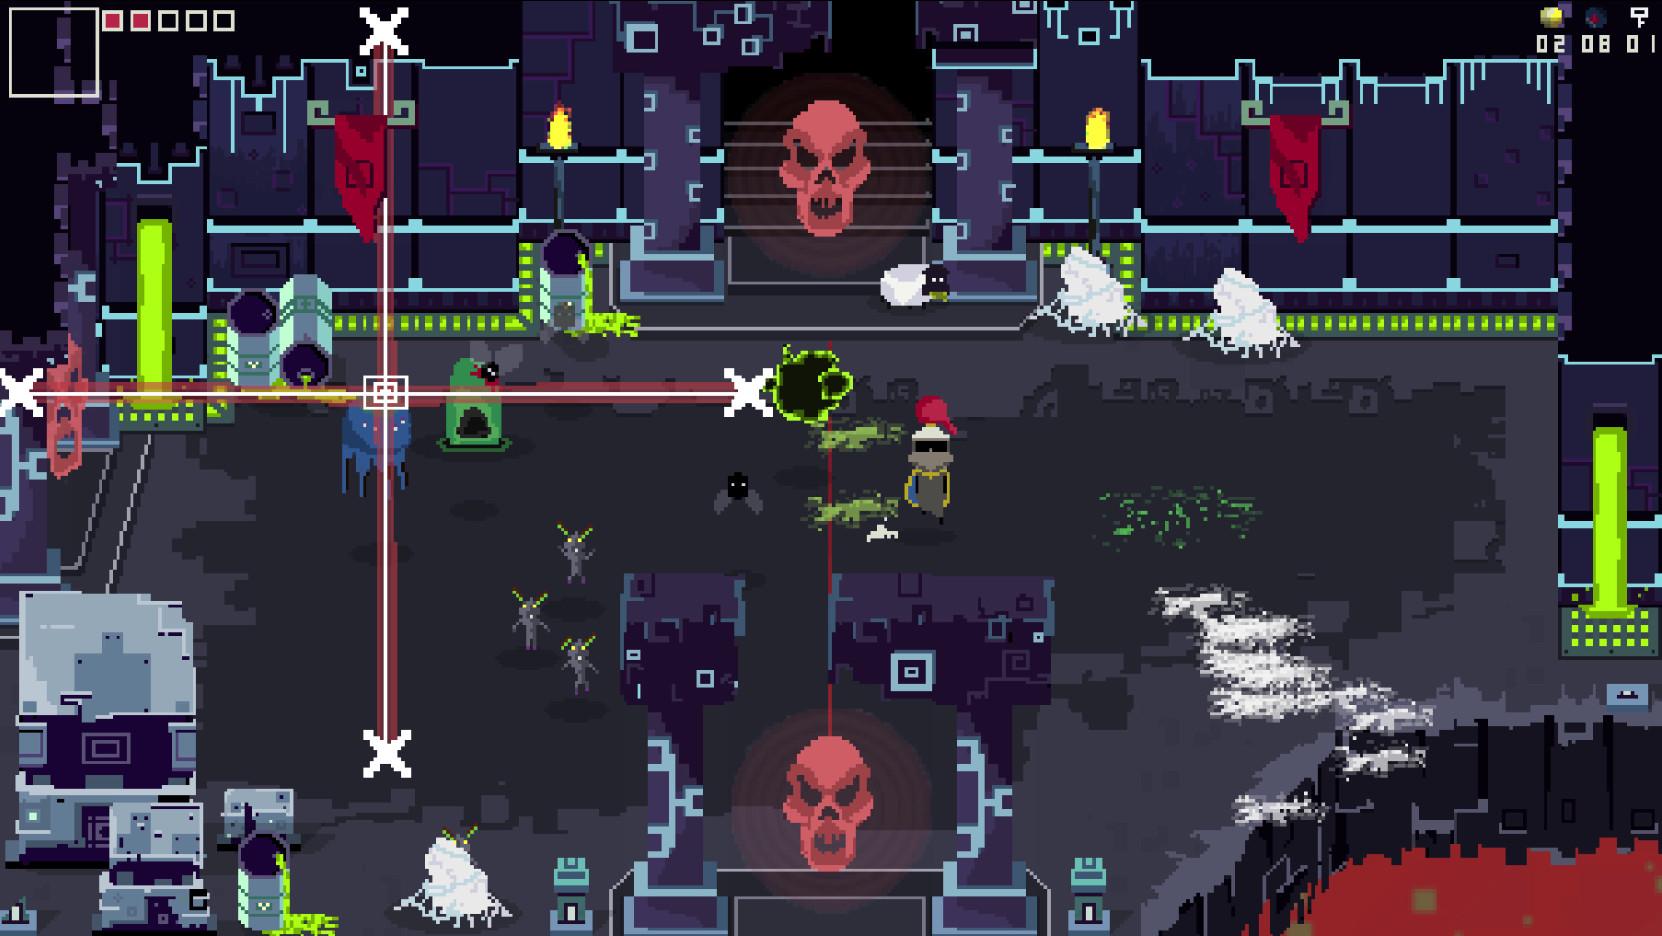 Screenshot №13 from game Silver Knight